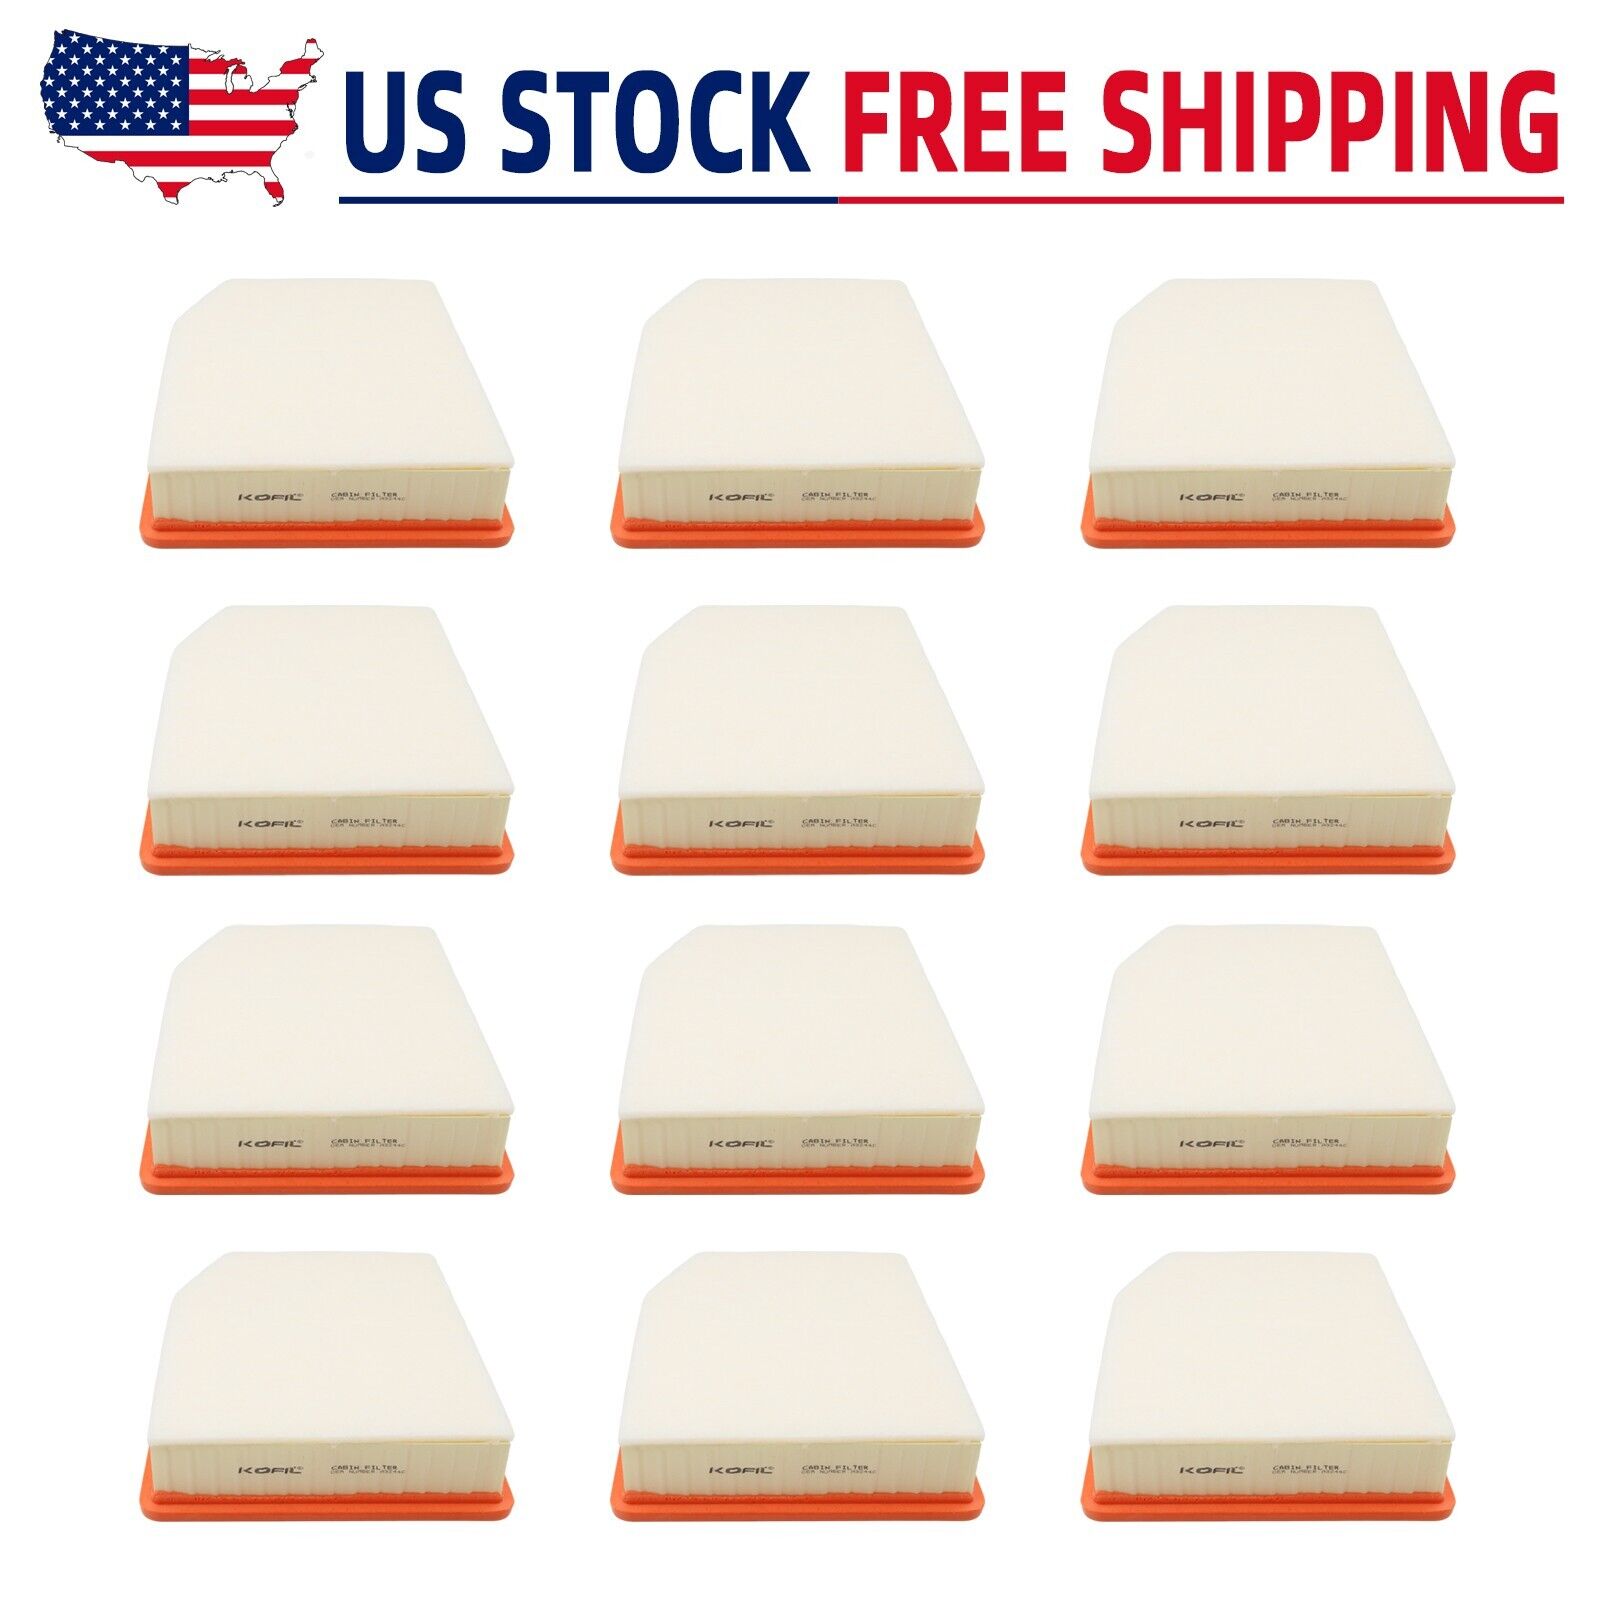 *(12)* A3212C Air Filter for GMC Acadia,Buick Enclave,Chevy Traverse,Cadillac XT